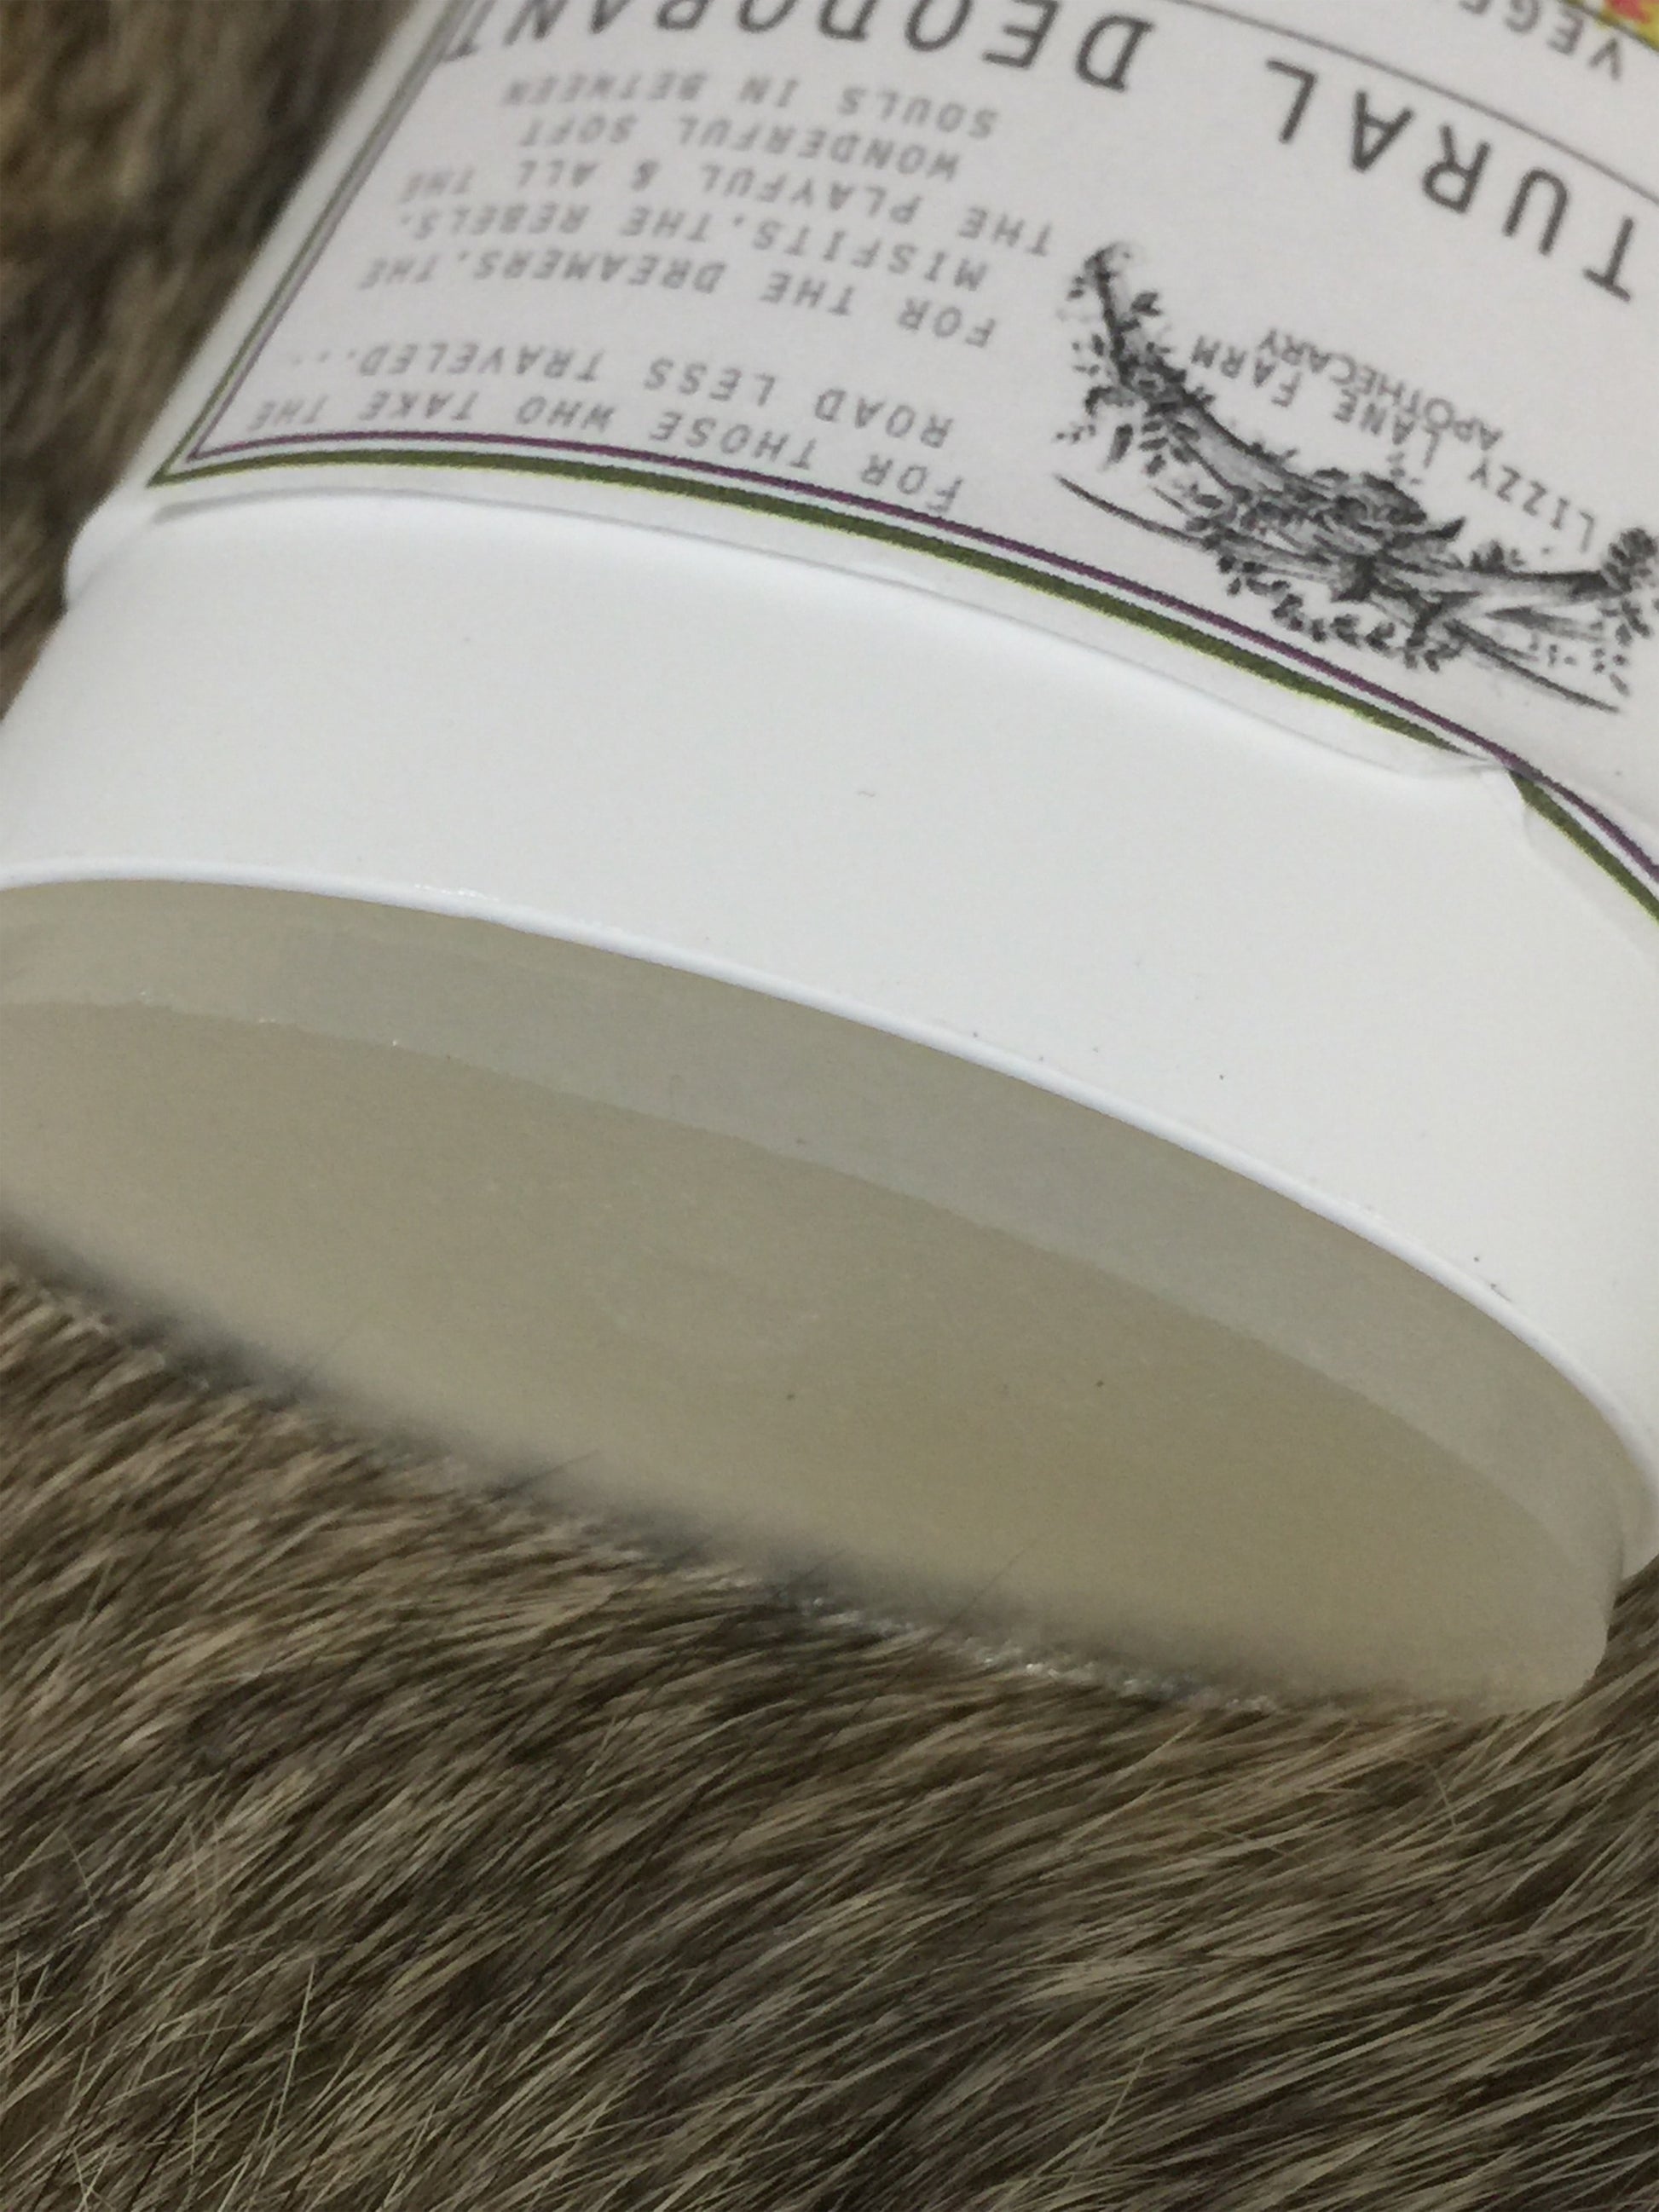 Natural Deodorant: Cool Weather Scents :: PICK • A • SCENT - Lizzy Lane Farm Apothecary